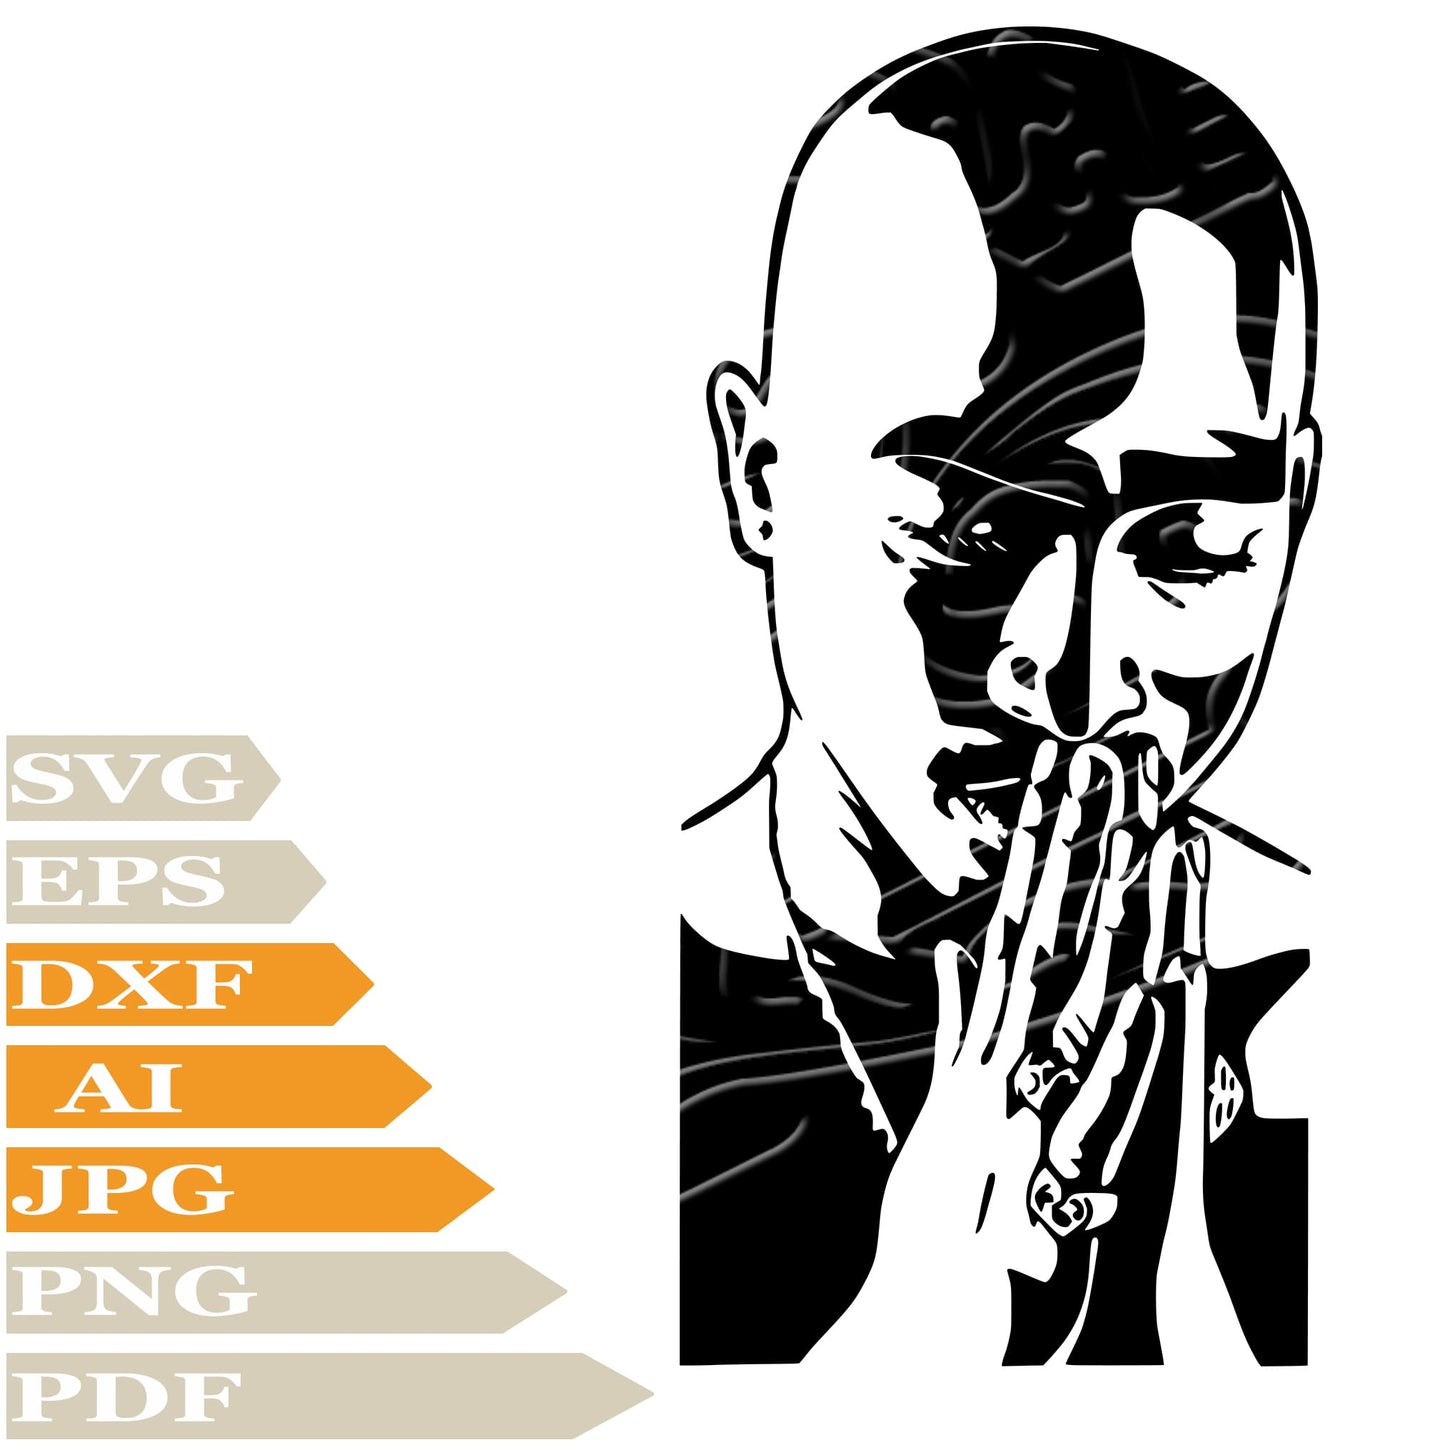 Tupac Shakur, 2Pac Svg File, Image Cut, Png, For Tattoo, Silhouette, Digital Vector Download, Cut File, Clipart, For Cricut